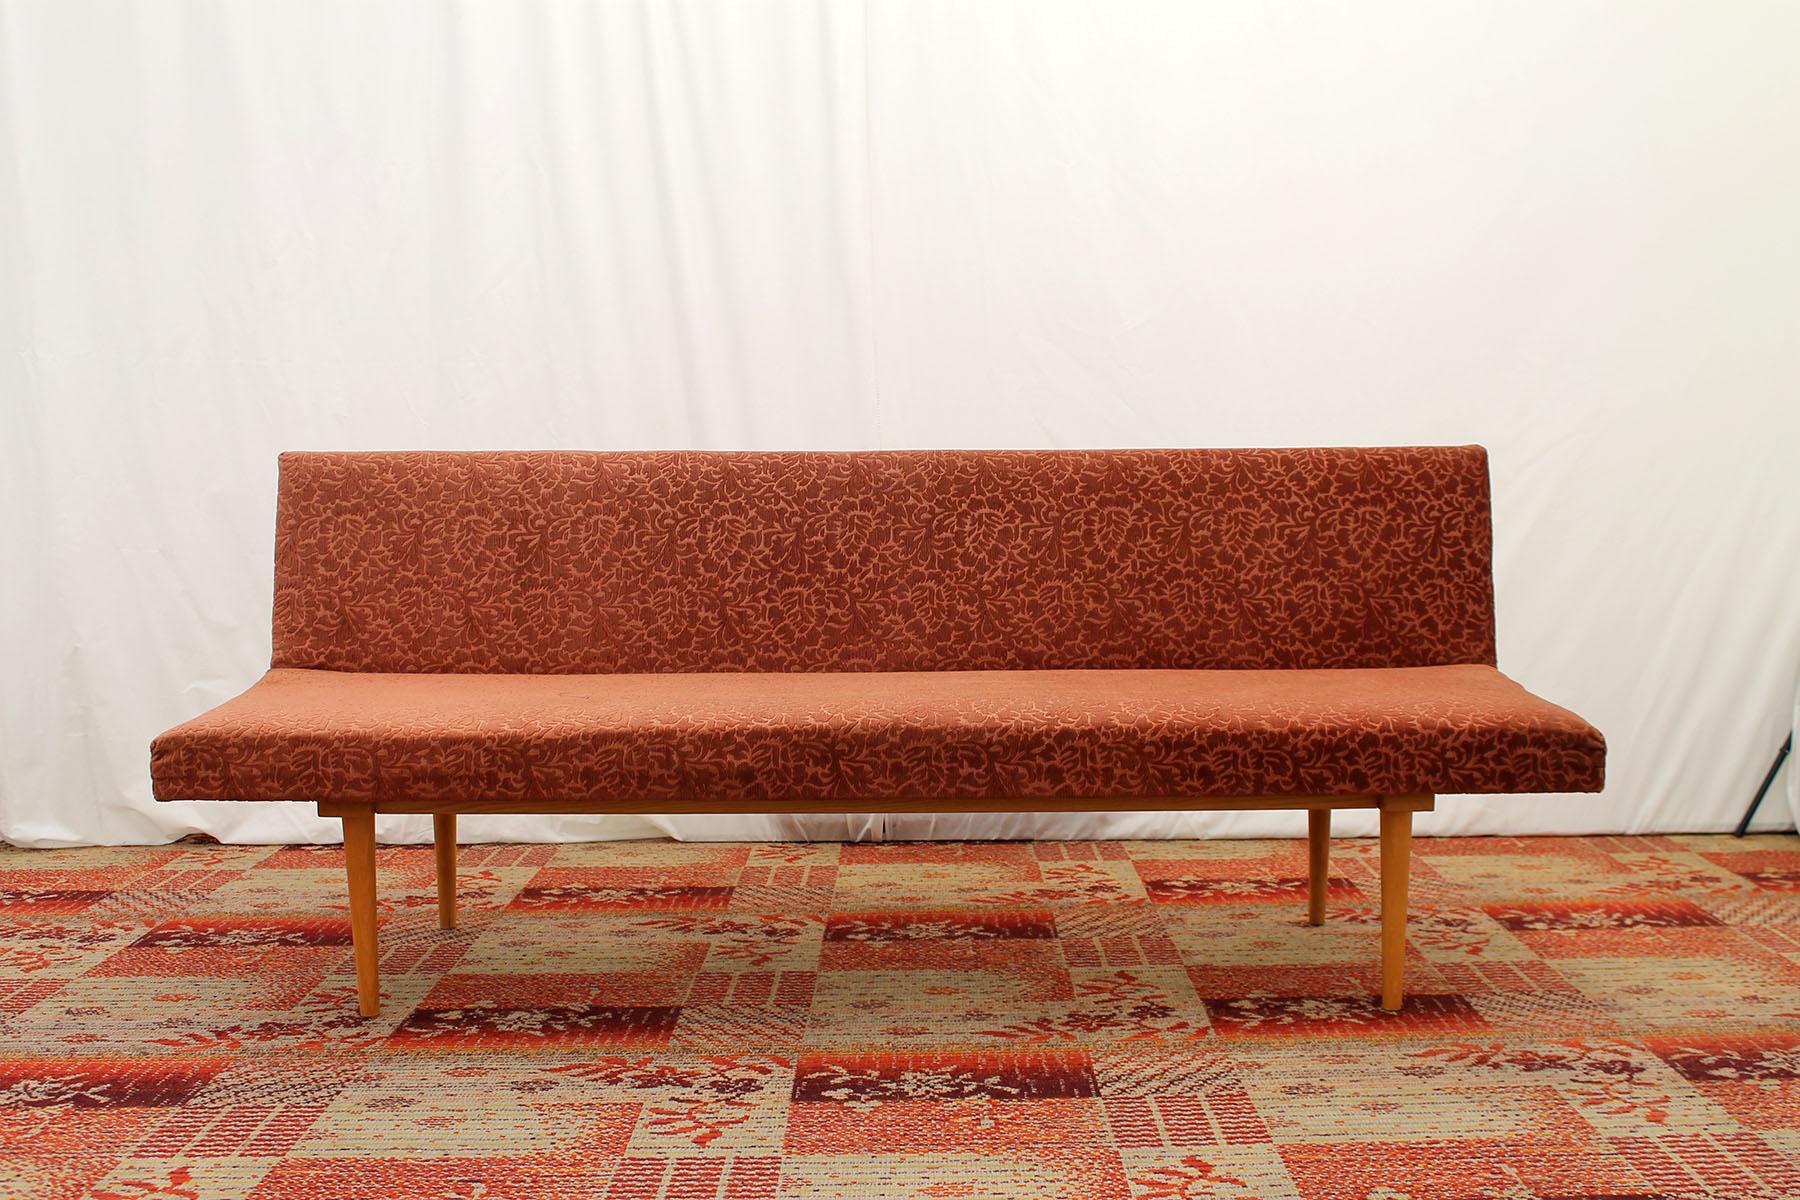 Midcentury sofa/daybed, made in the former Czechoslovakia in the 1960s, designed by Miroslav Navrátil. Material: beechwood, fabric. The sofa is in well preserved Vintage condition, showing slight signs of age and using.

Measures : Height: 74